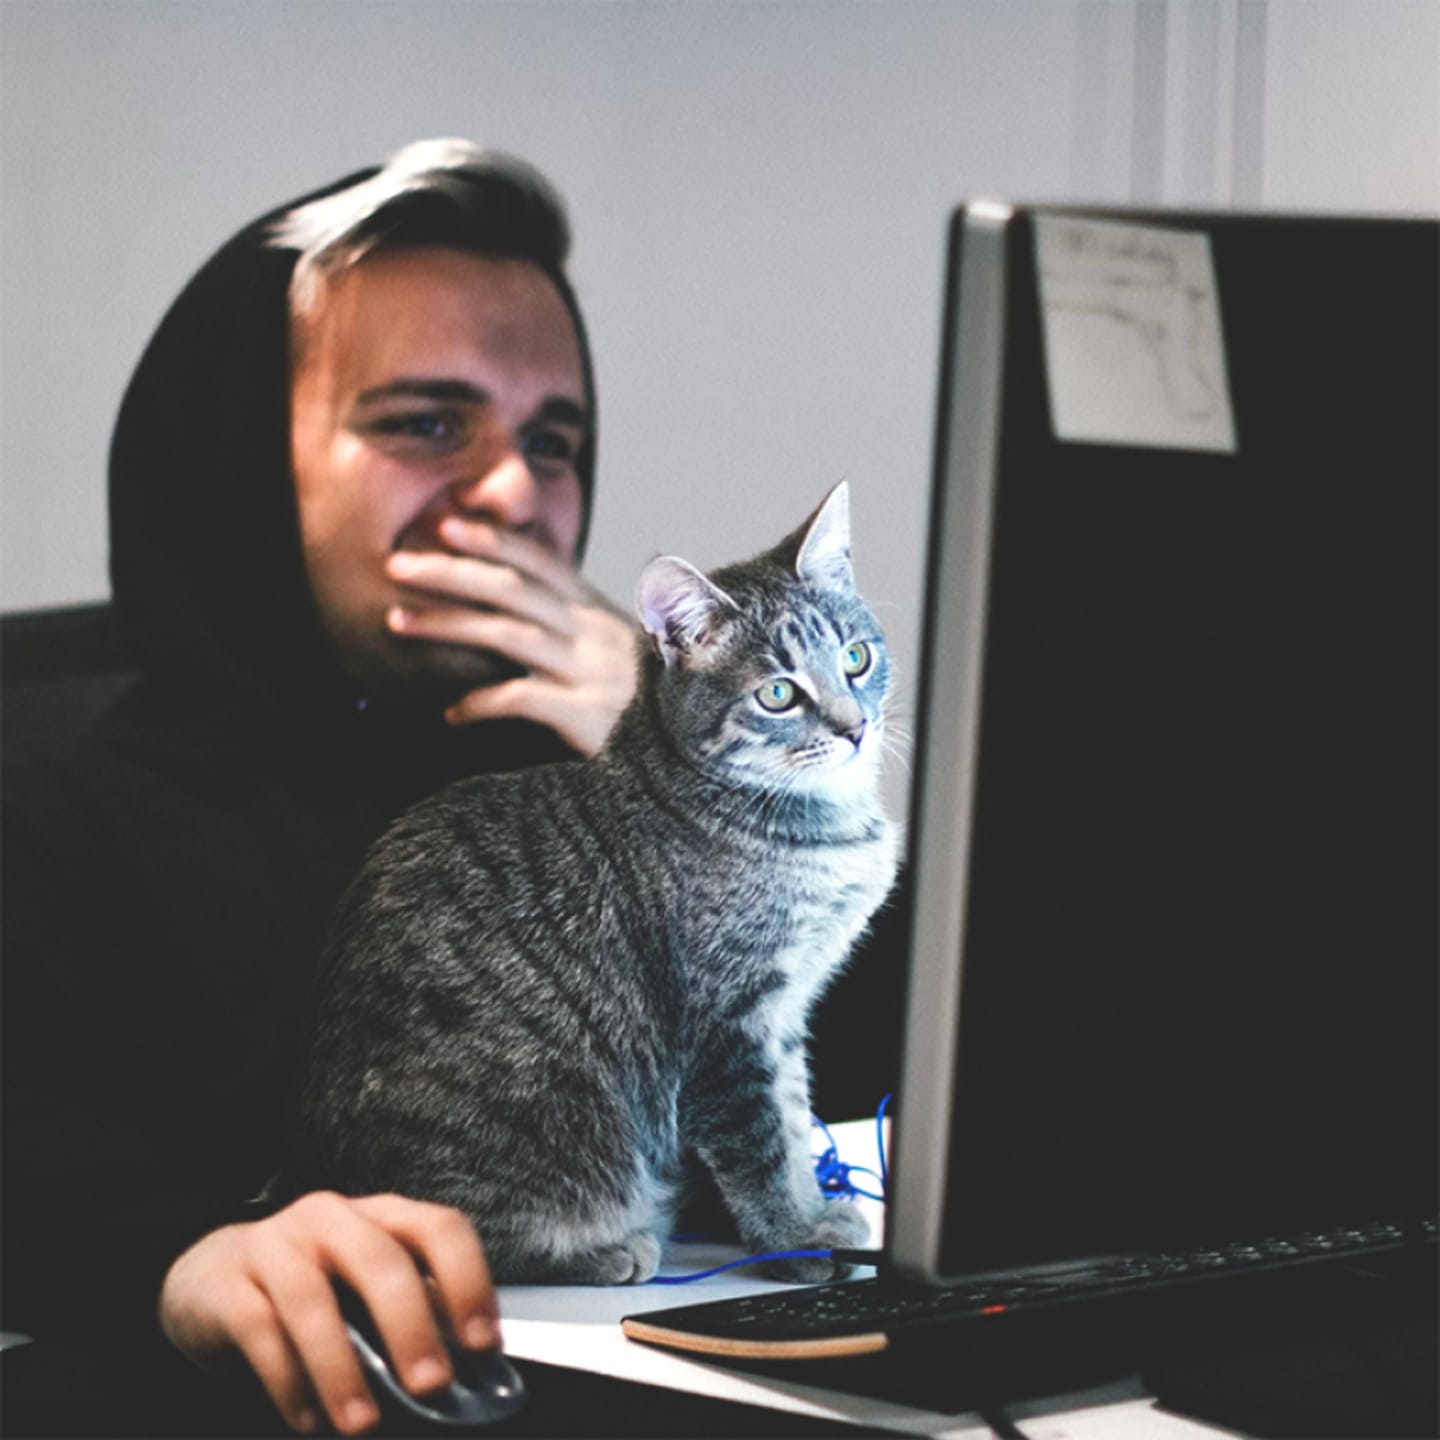 Man at computer with cat on lap.